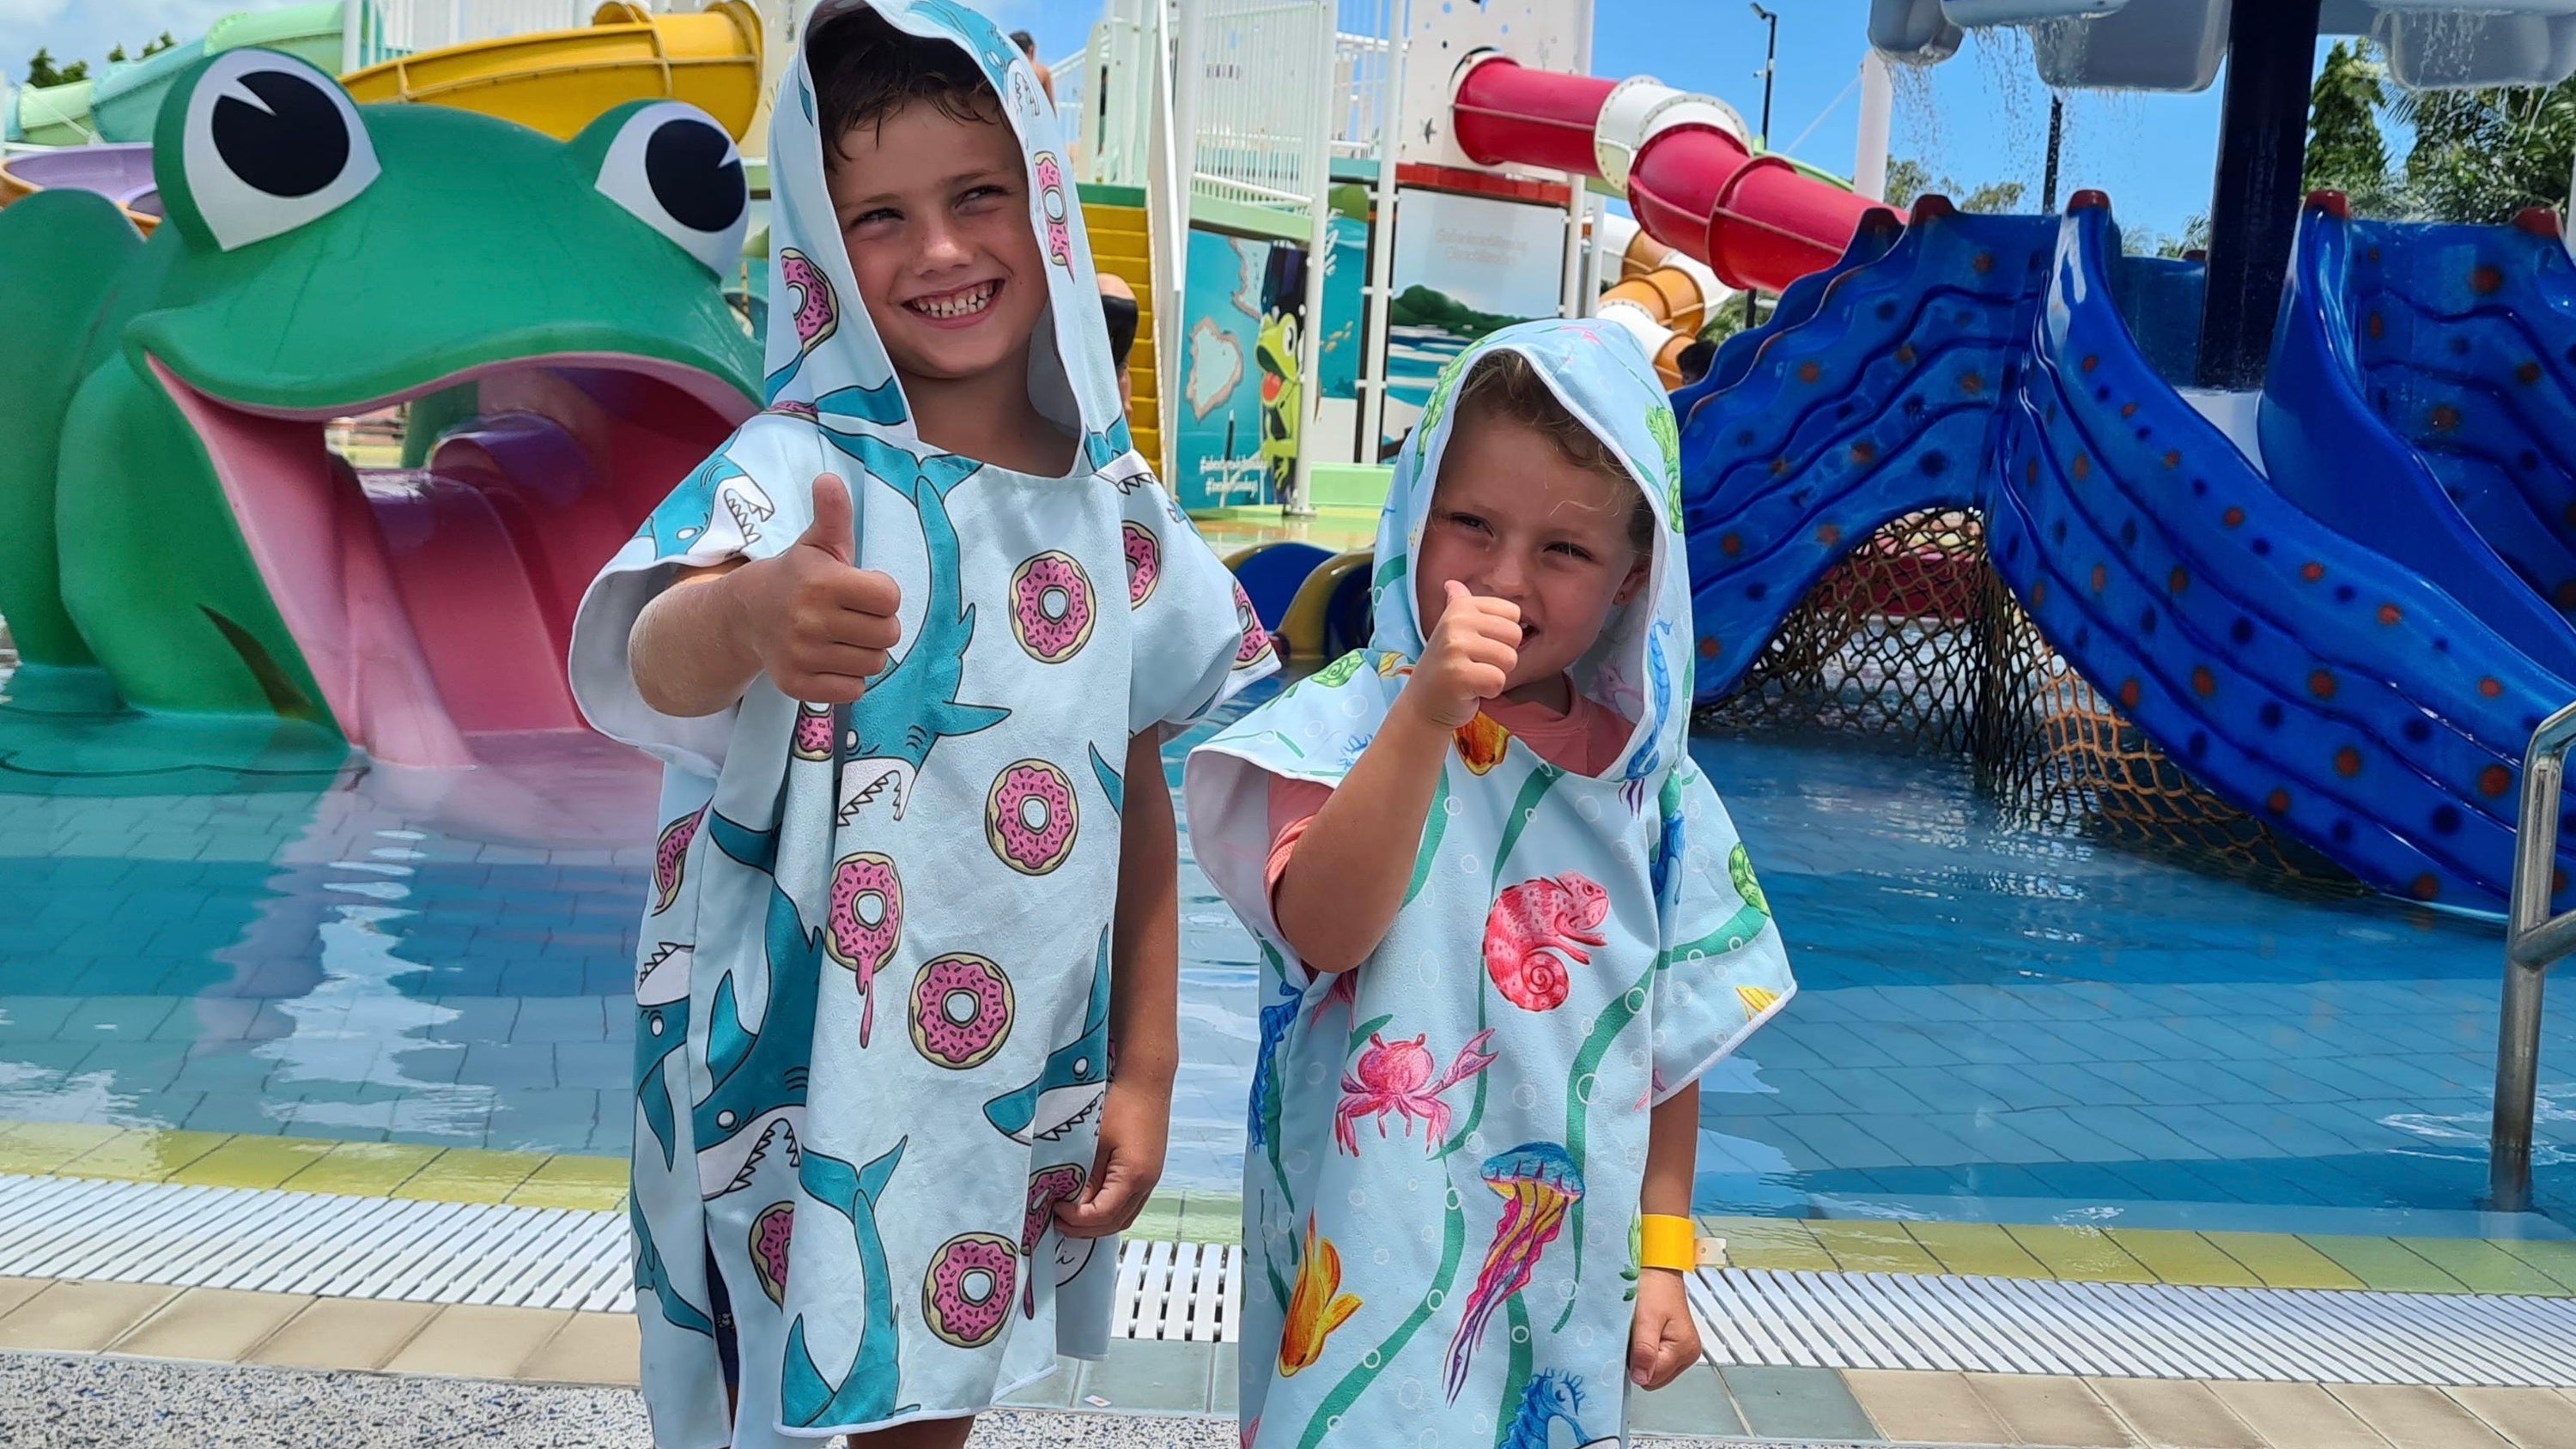 These two kids wearing Sandi Toes hoodies enjoying their day at Airlie Beach Water Slide Park